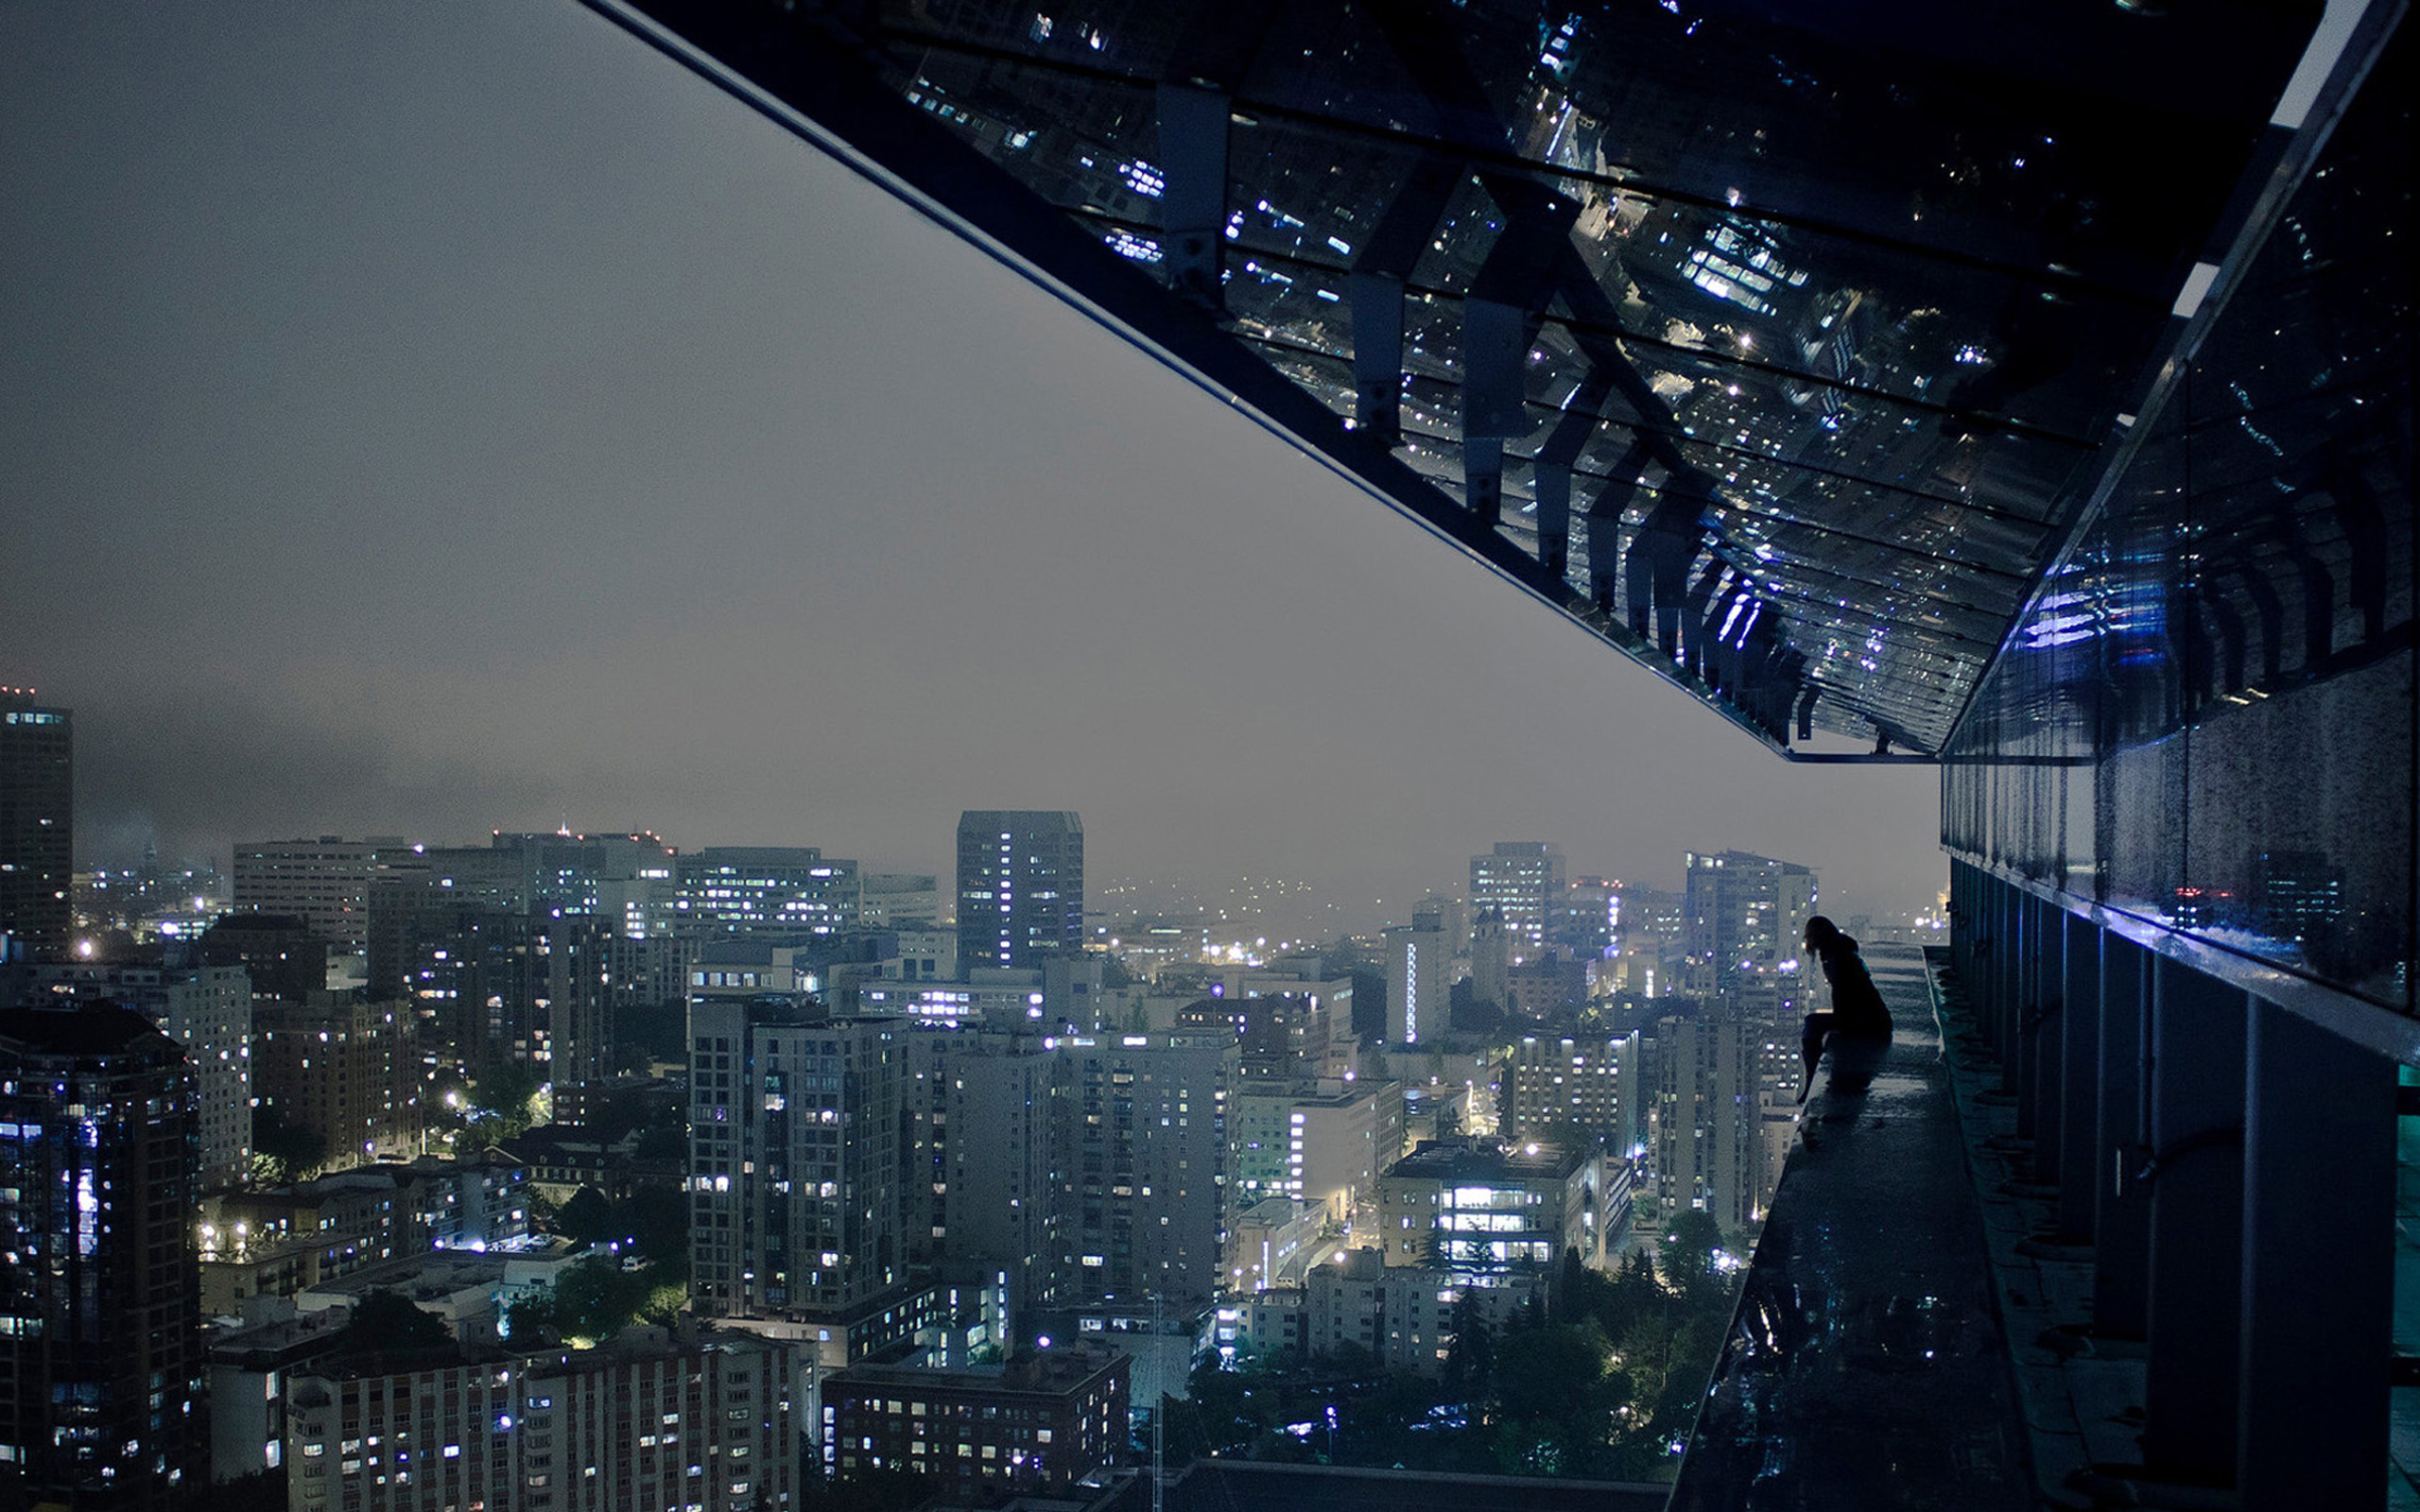 Tomt Wallpaper Image Girl On Ledge Of Building Looking Over A City In The Nighttime